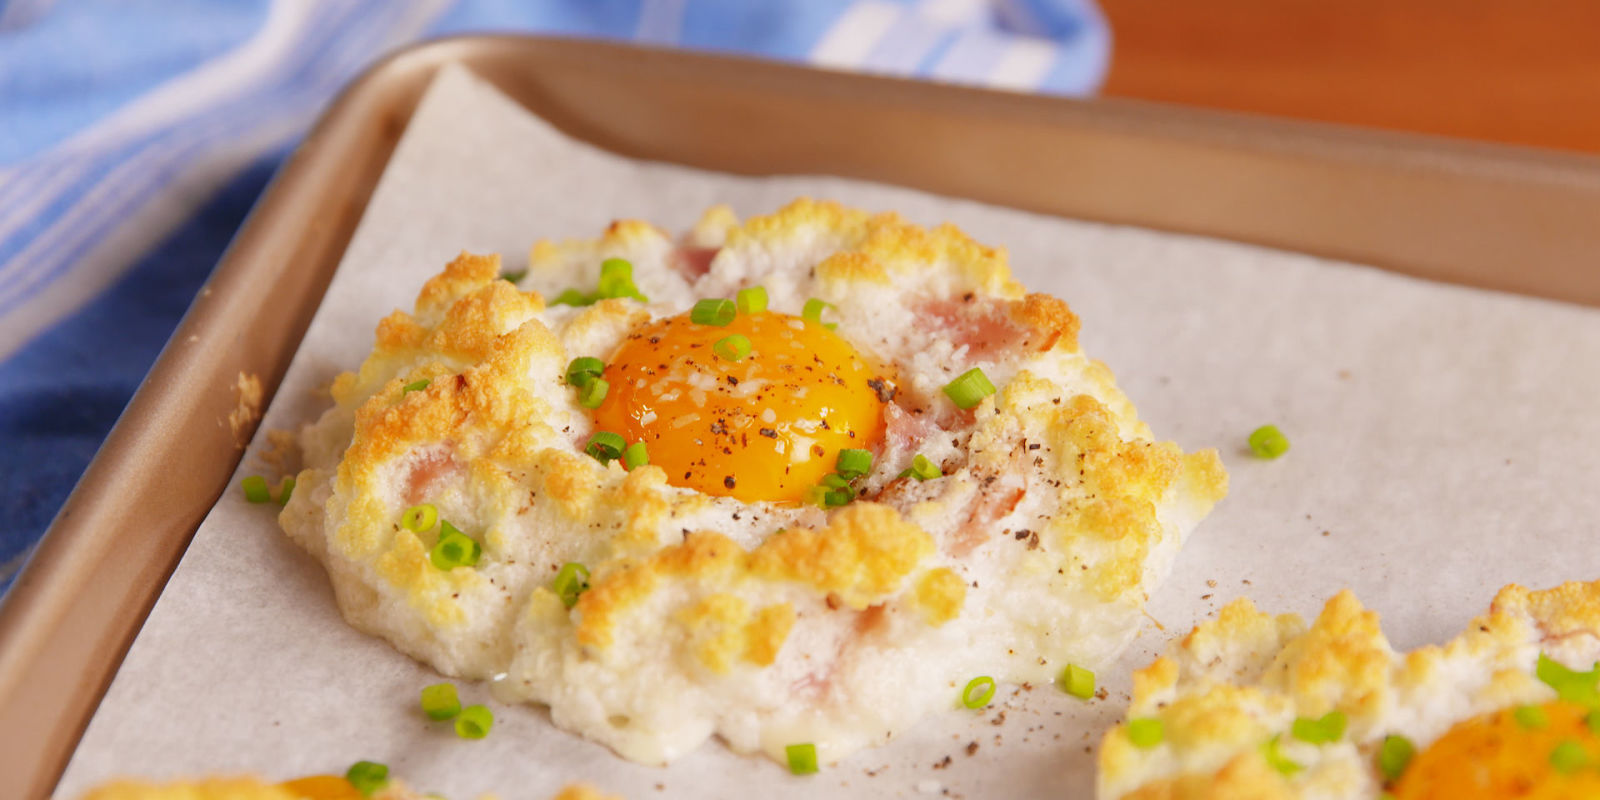 What Cooking Show Would You Actually Do Well On? Cloud eggs